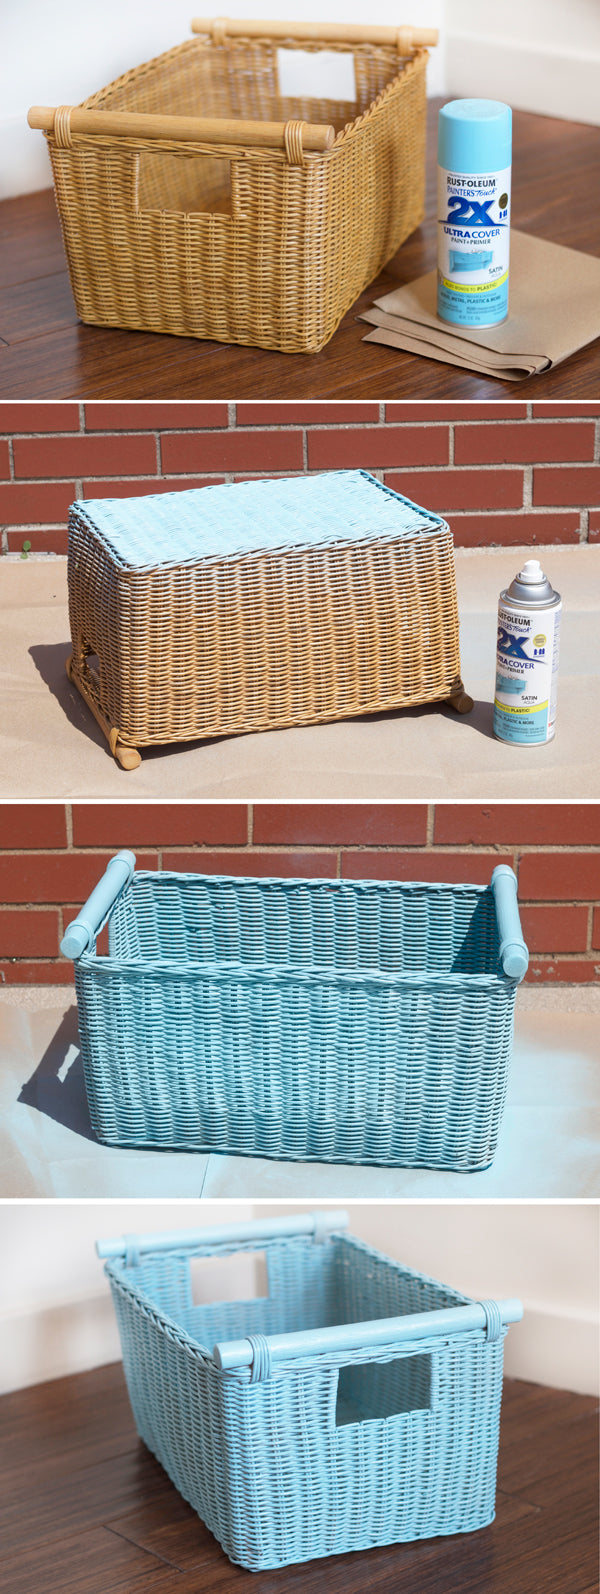 Step-by-step images for spray painting our Pole Handle Storage Basket